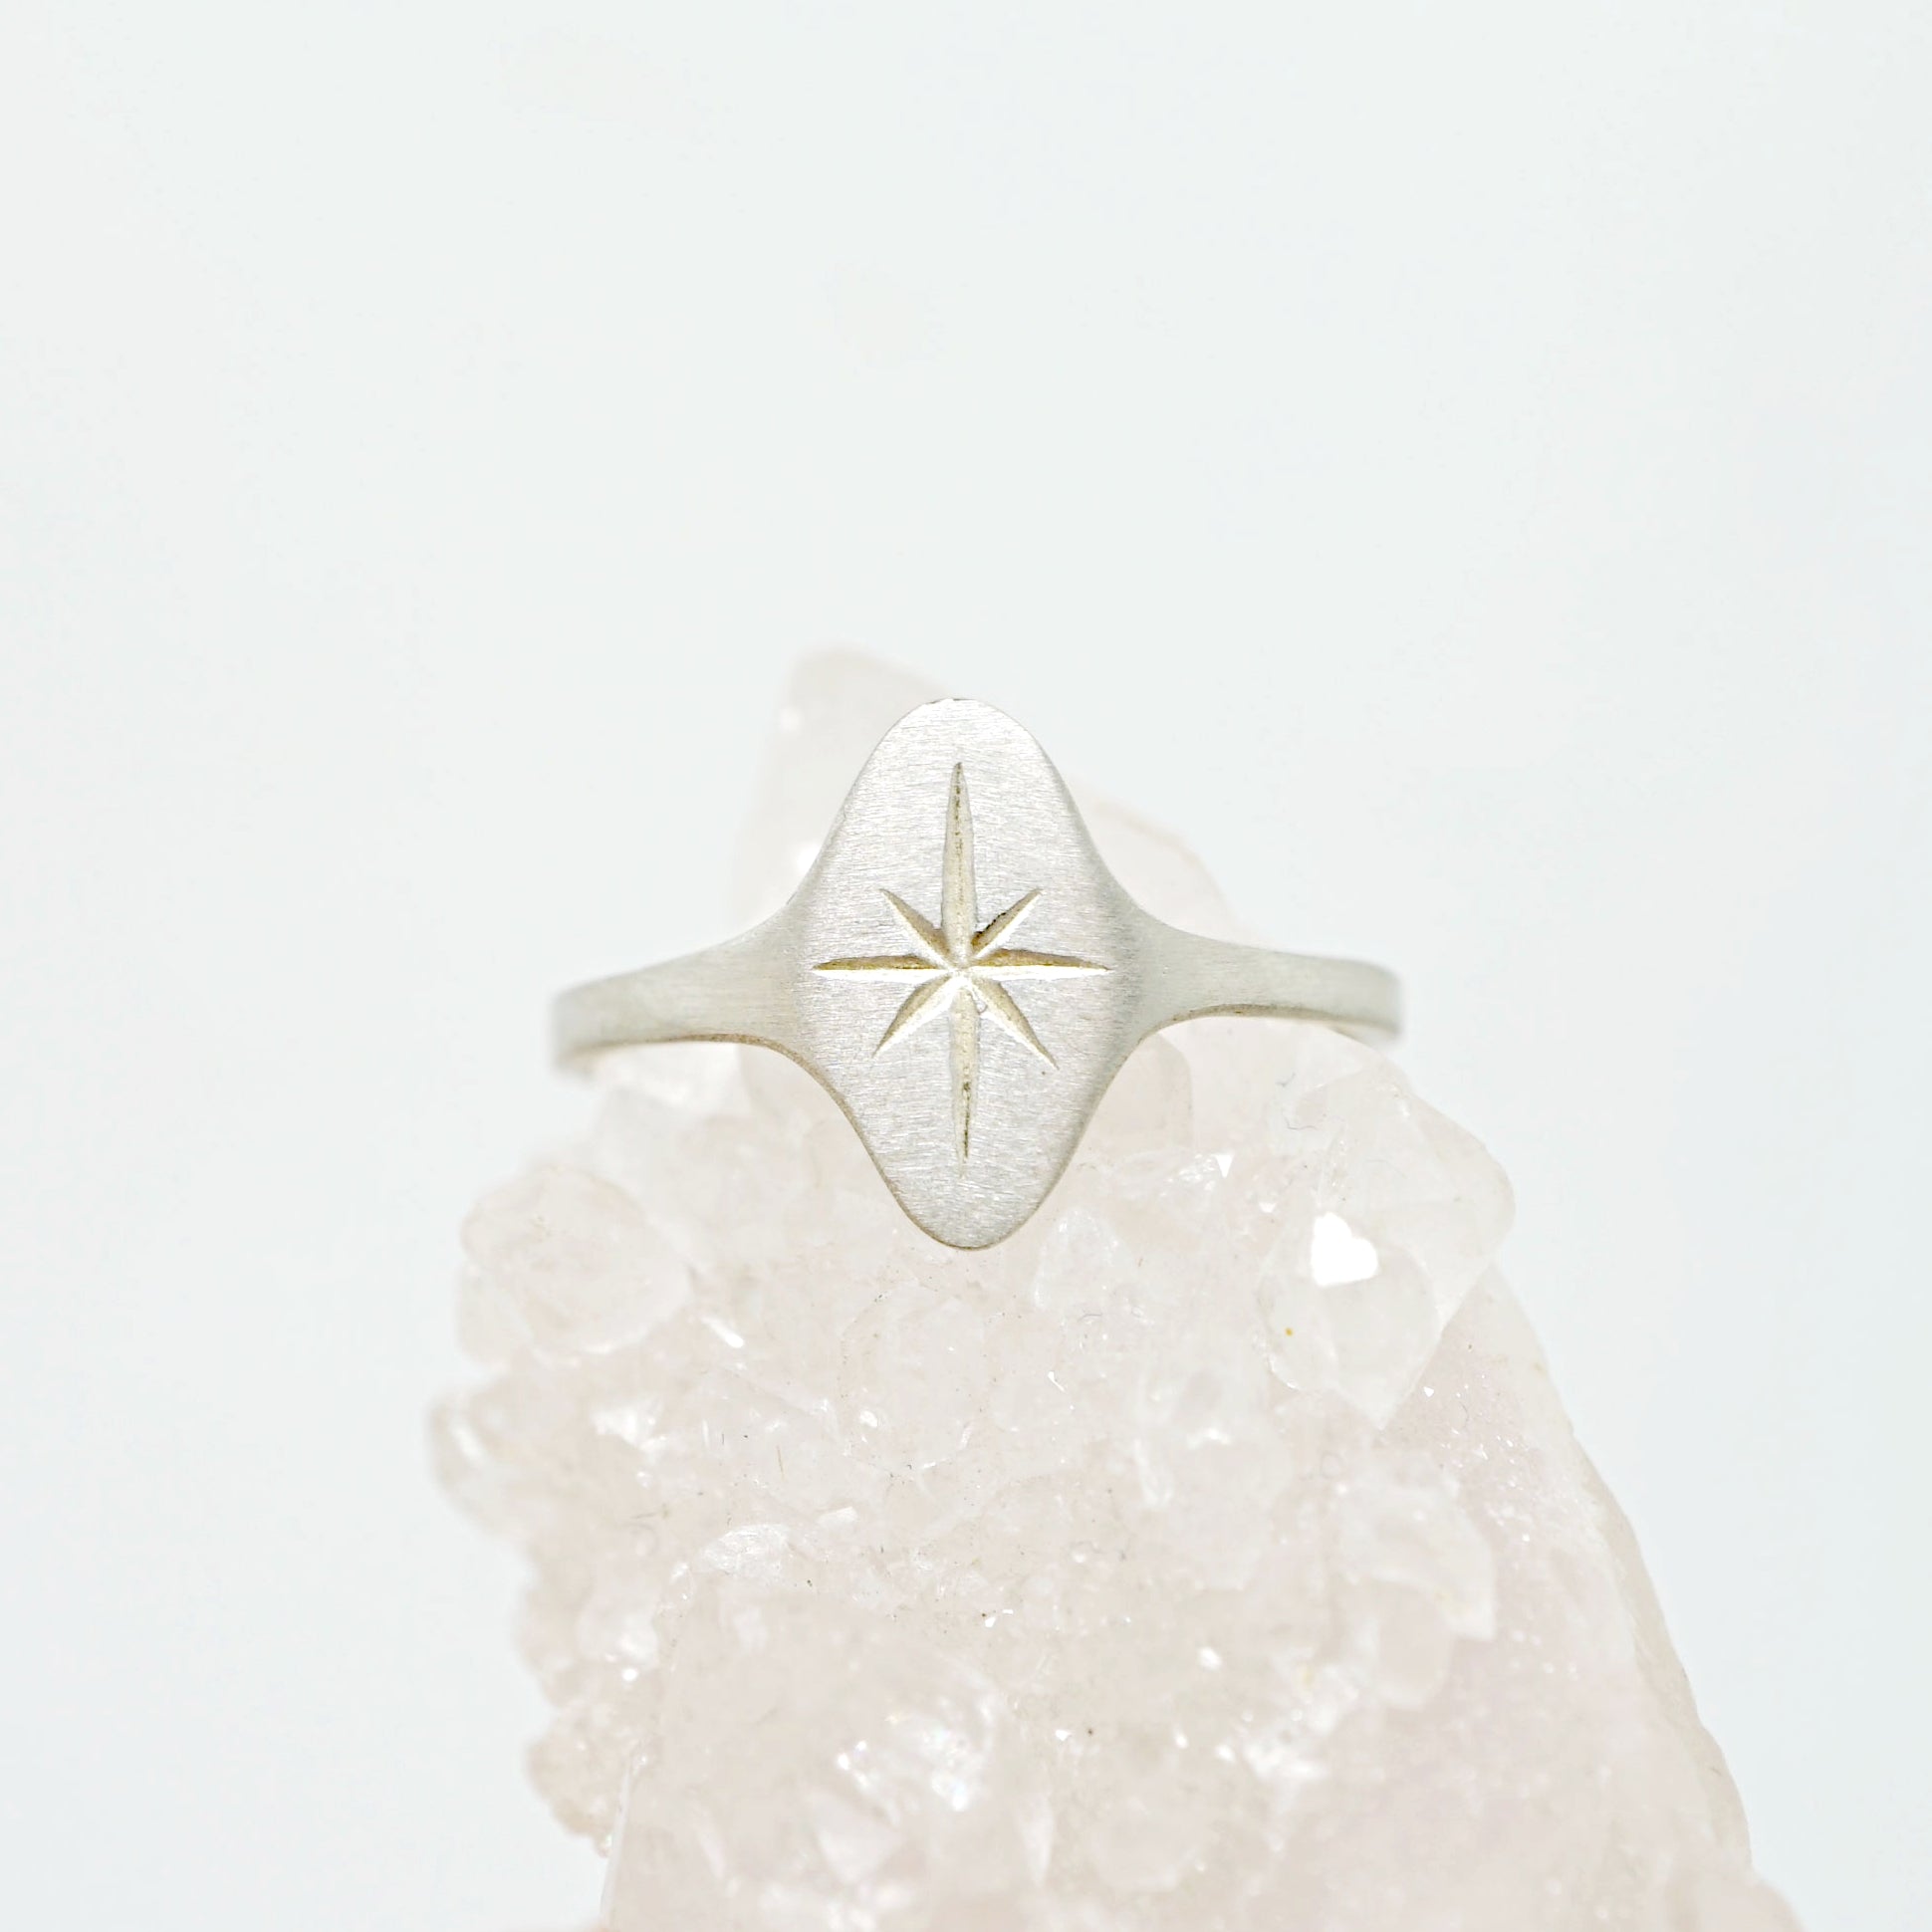 Étoile signet ring in Sterling Silver